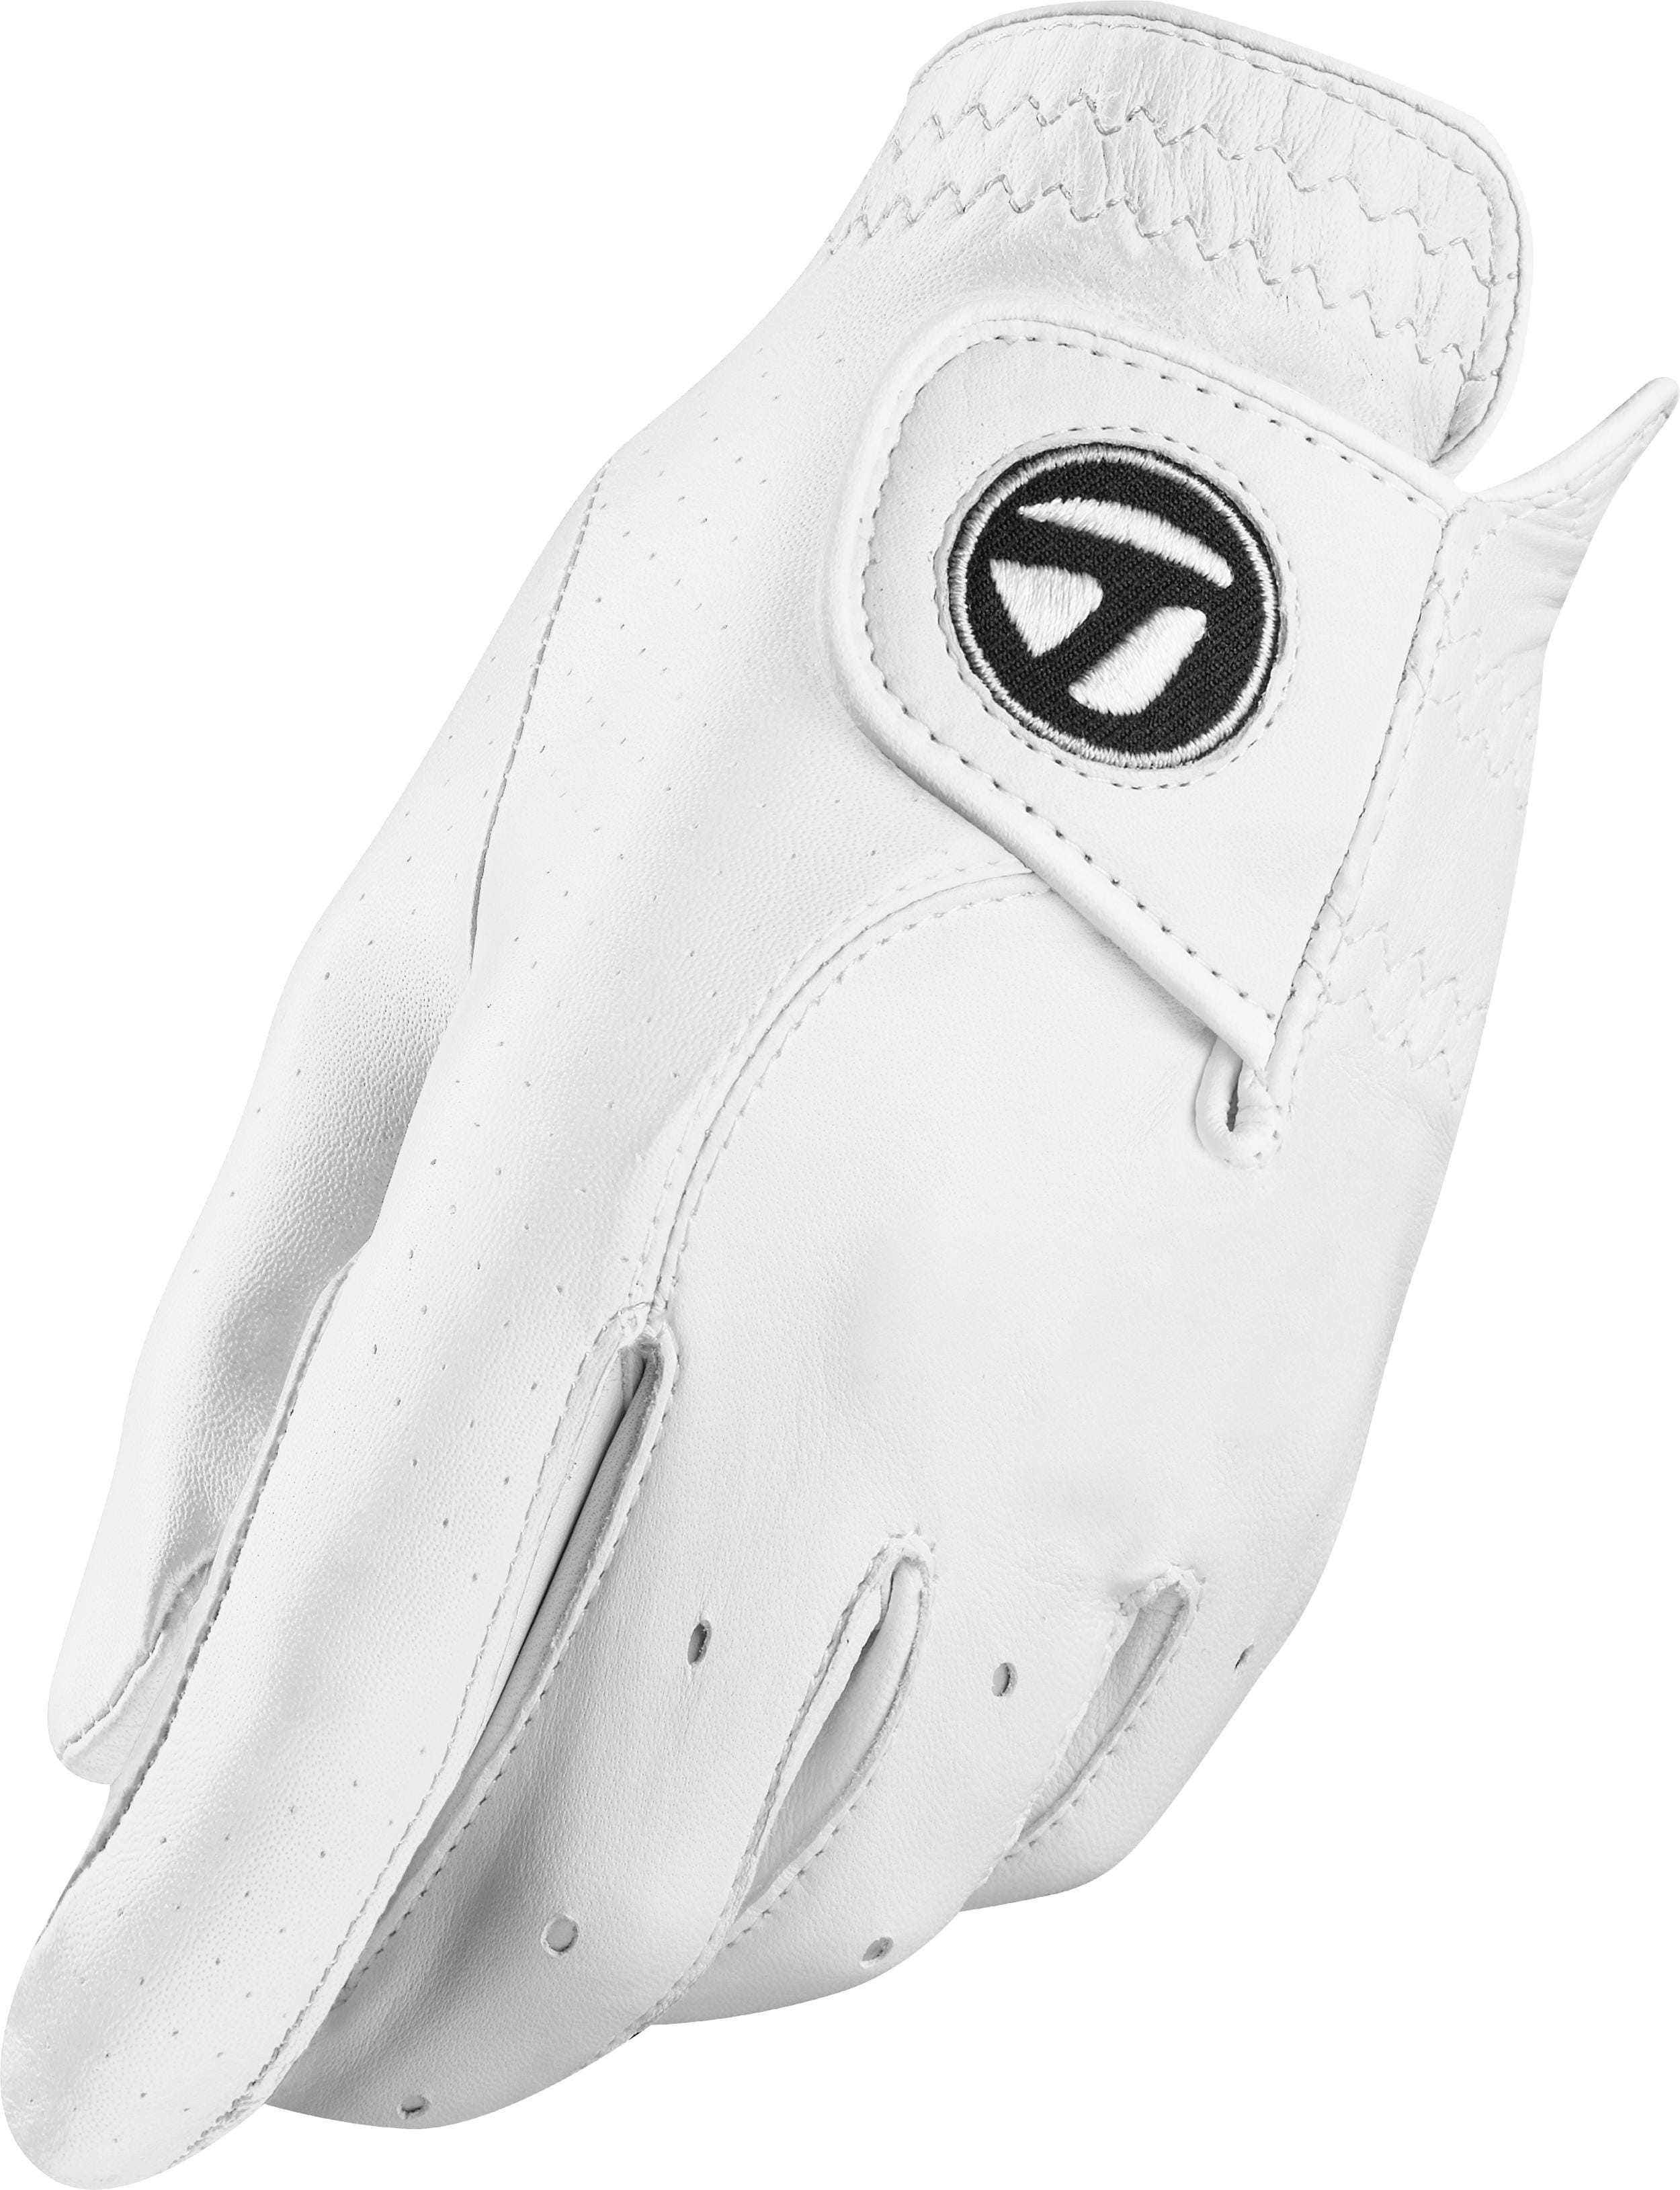 TaylorMade Tour Preferred Handschuh, white